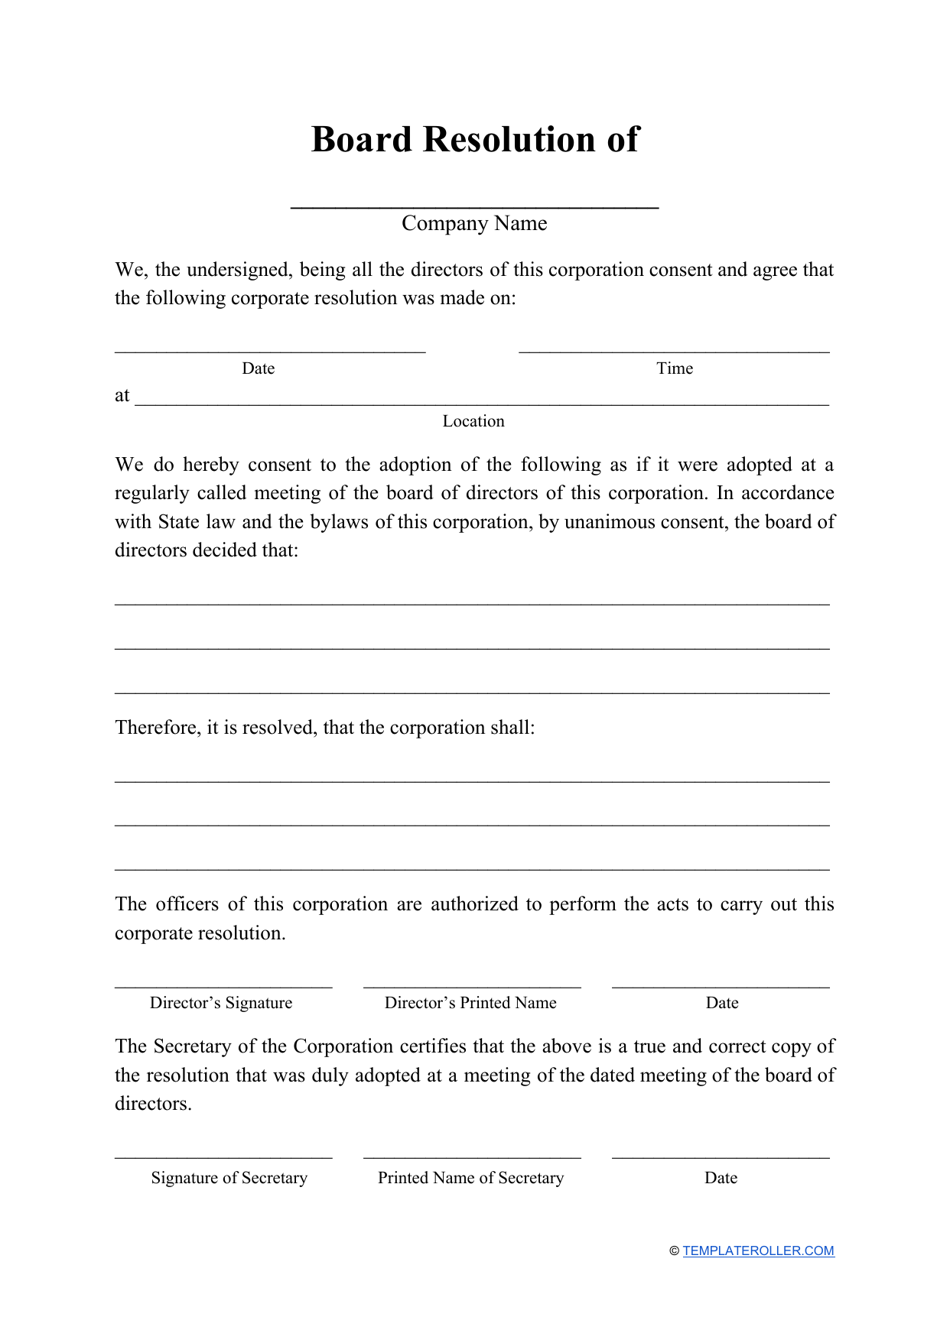 board-resolution-template-fill-out-sign-online-and-download-pdf